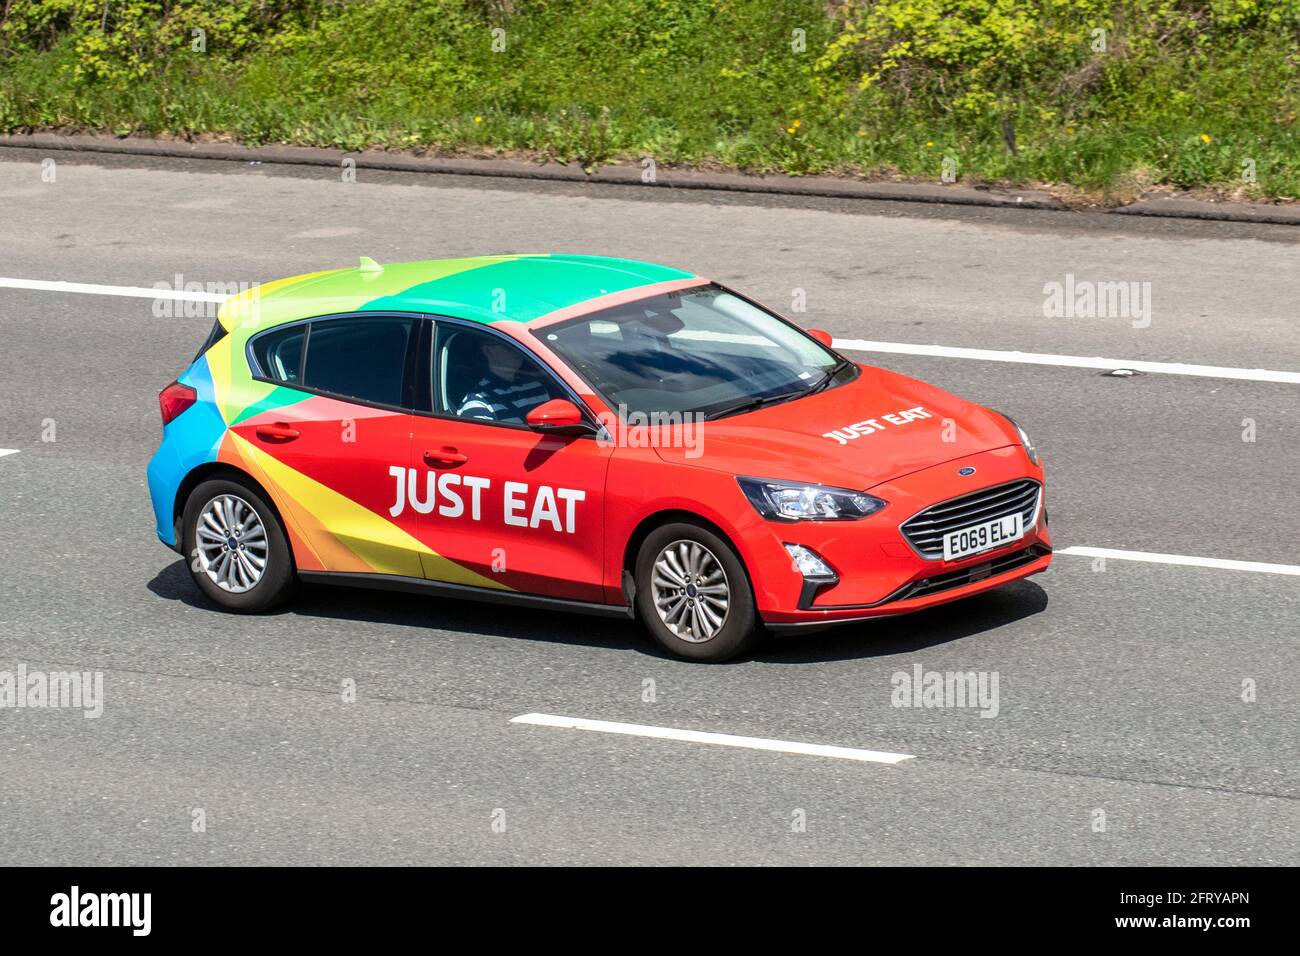 Just Eat 2019 Ford Focus Titanium Tdci red diesel hatchback; Vehicular traffic moving vehicles, catering commercial vans, foods courier on the Just Eat network, takeaway food business vehicles, livered cars driving vehicle on UK roads, motors, motoring on the M6 motorway highway network. Stock Photo